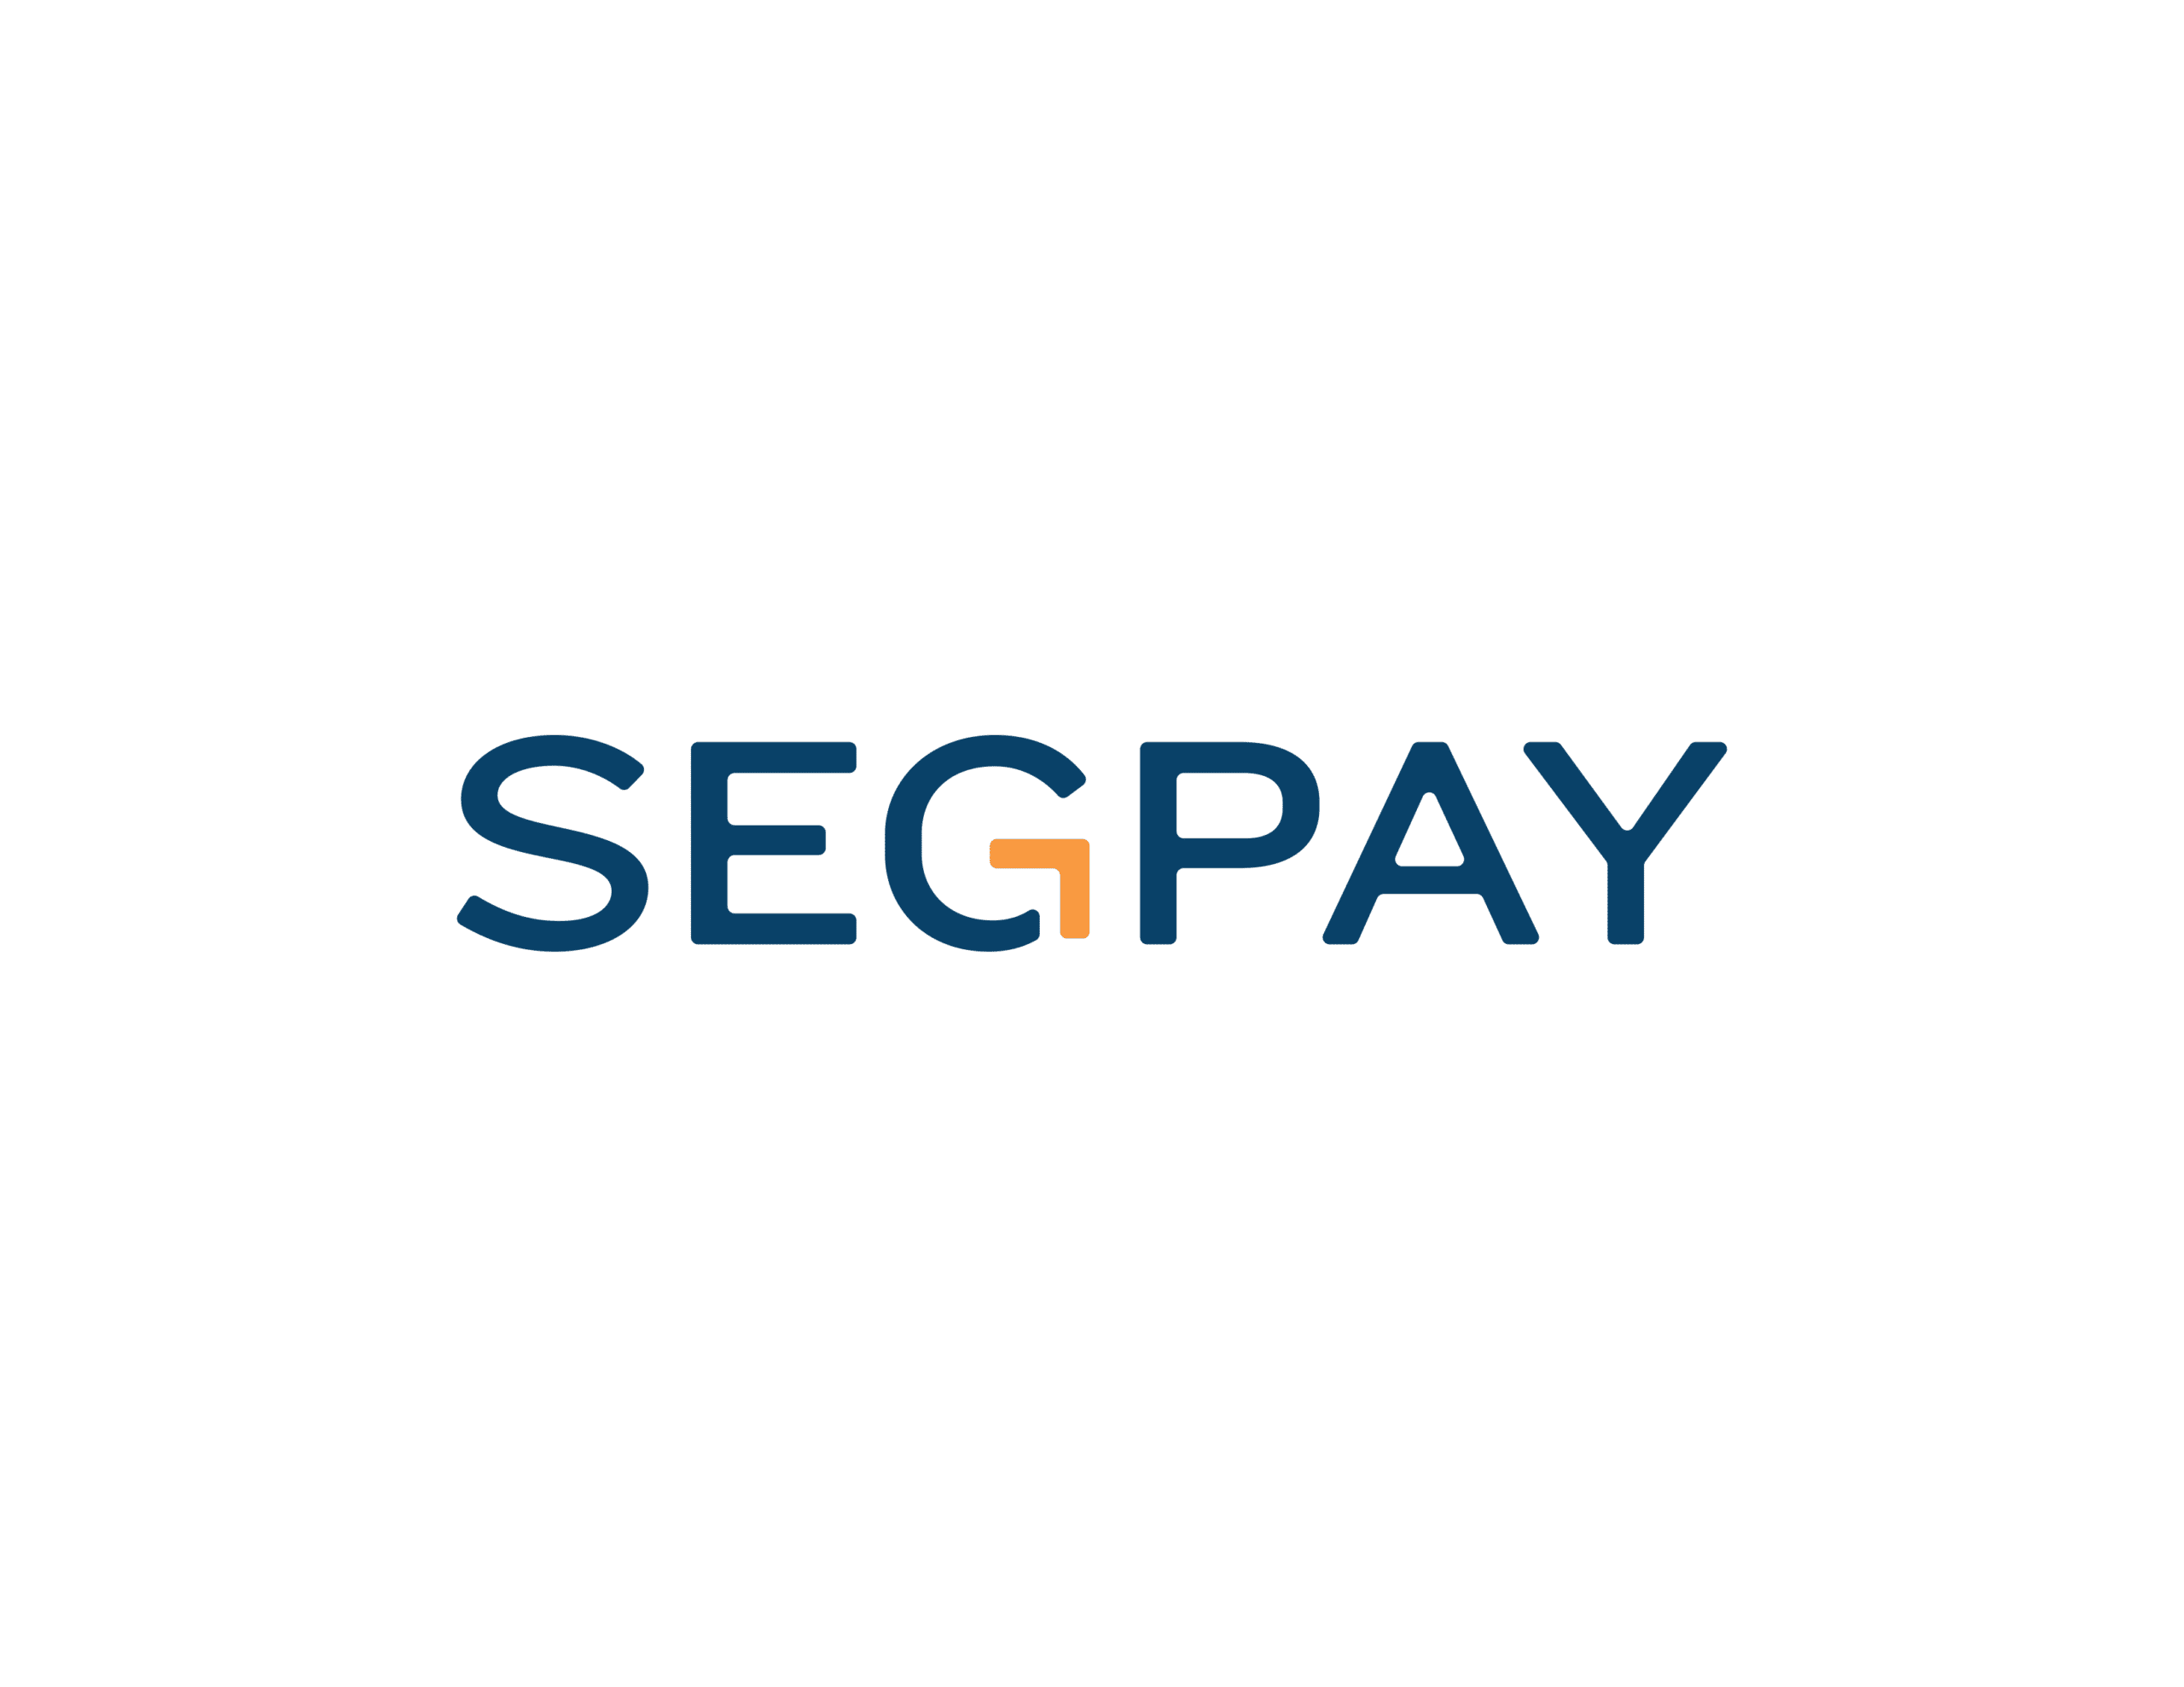 Is segpay secure